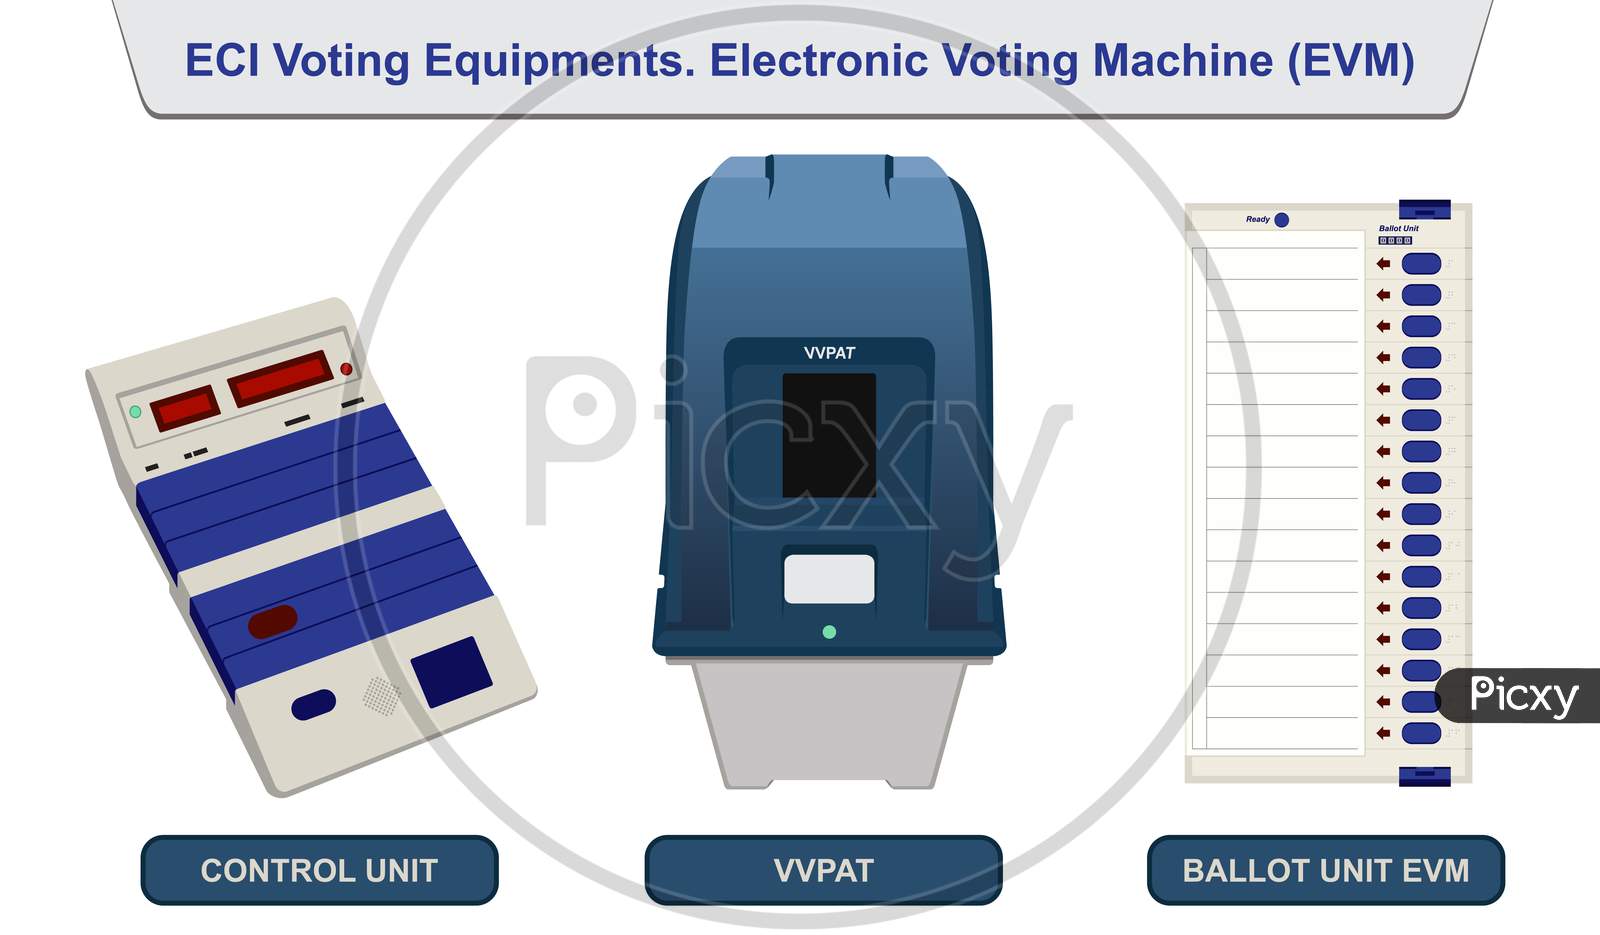 Image Of Eci Voting Equipments Electronic Voting Machine Evm Control Unit And Vvpat Ks703876 Picxy 9900